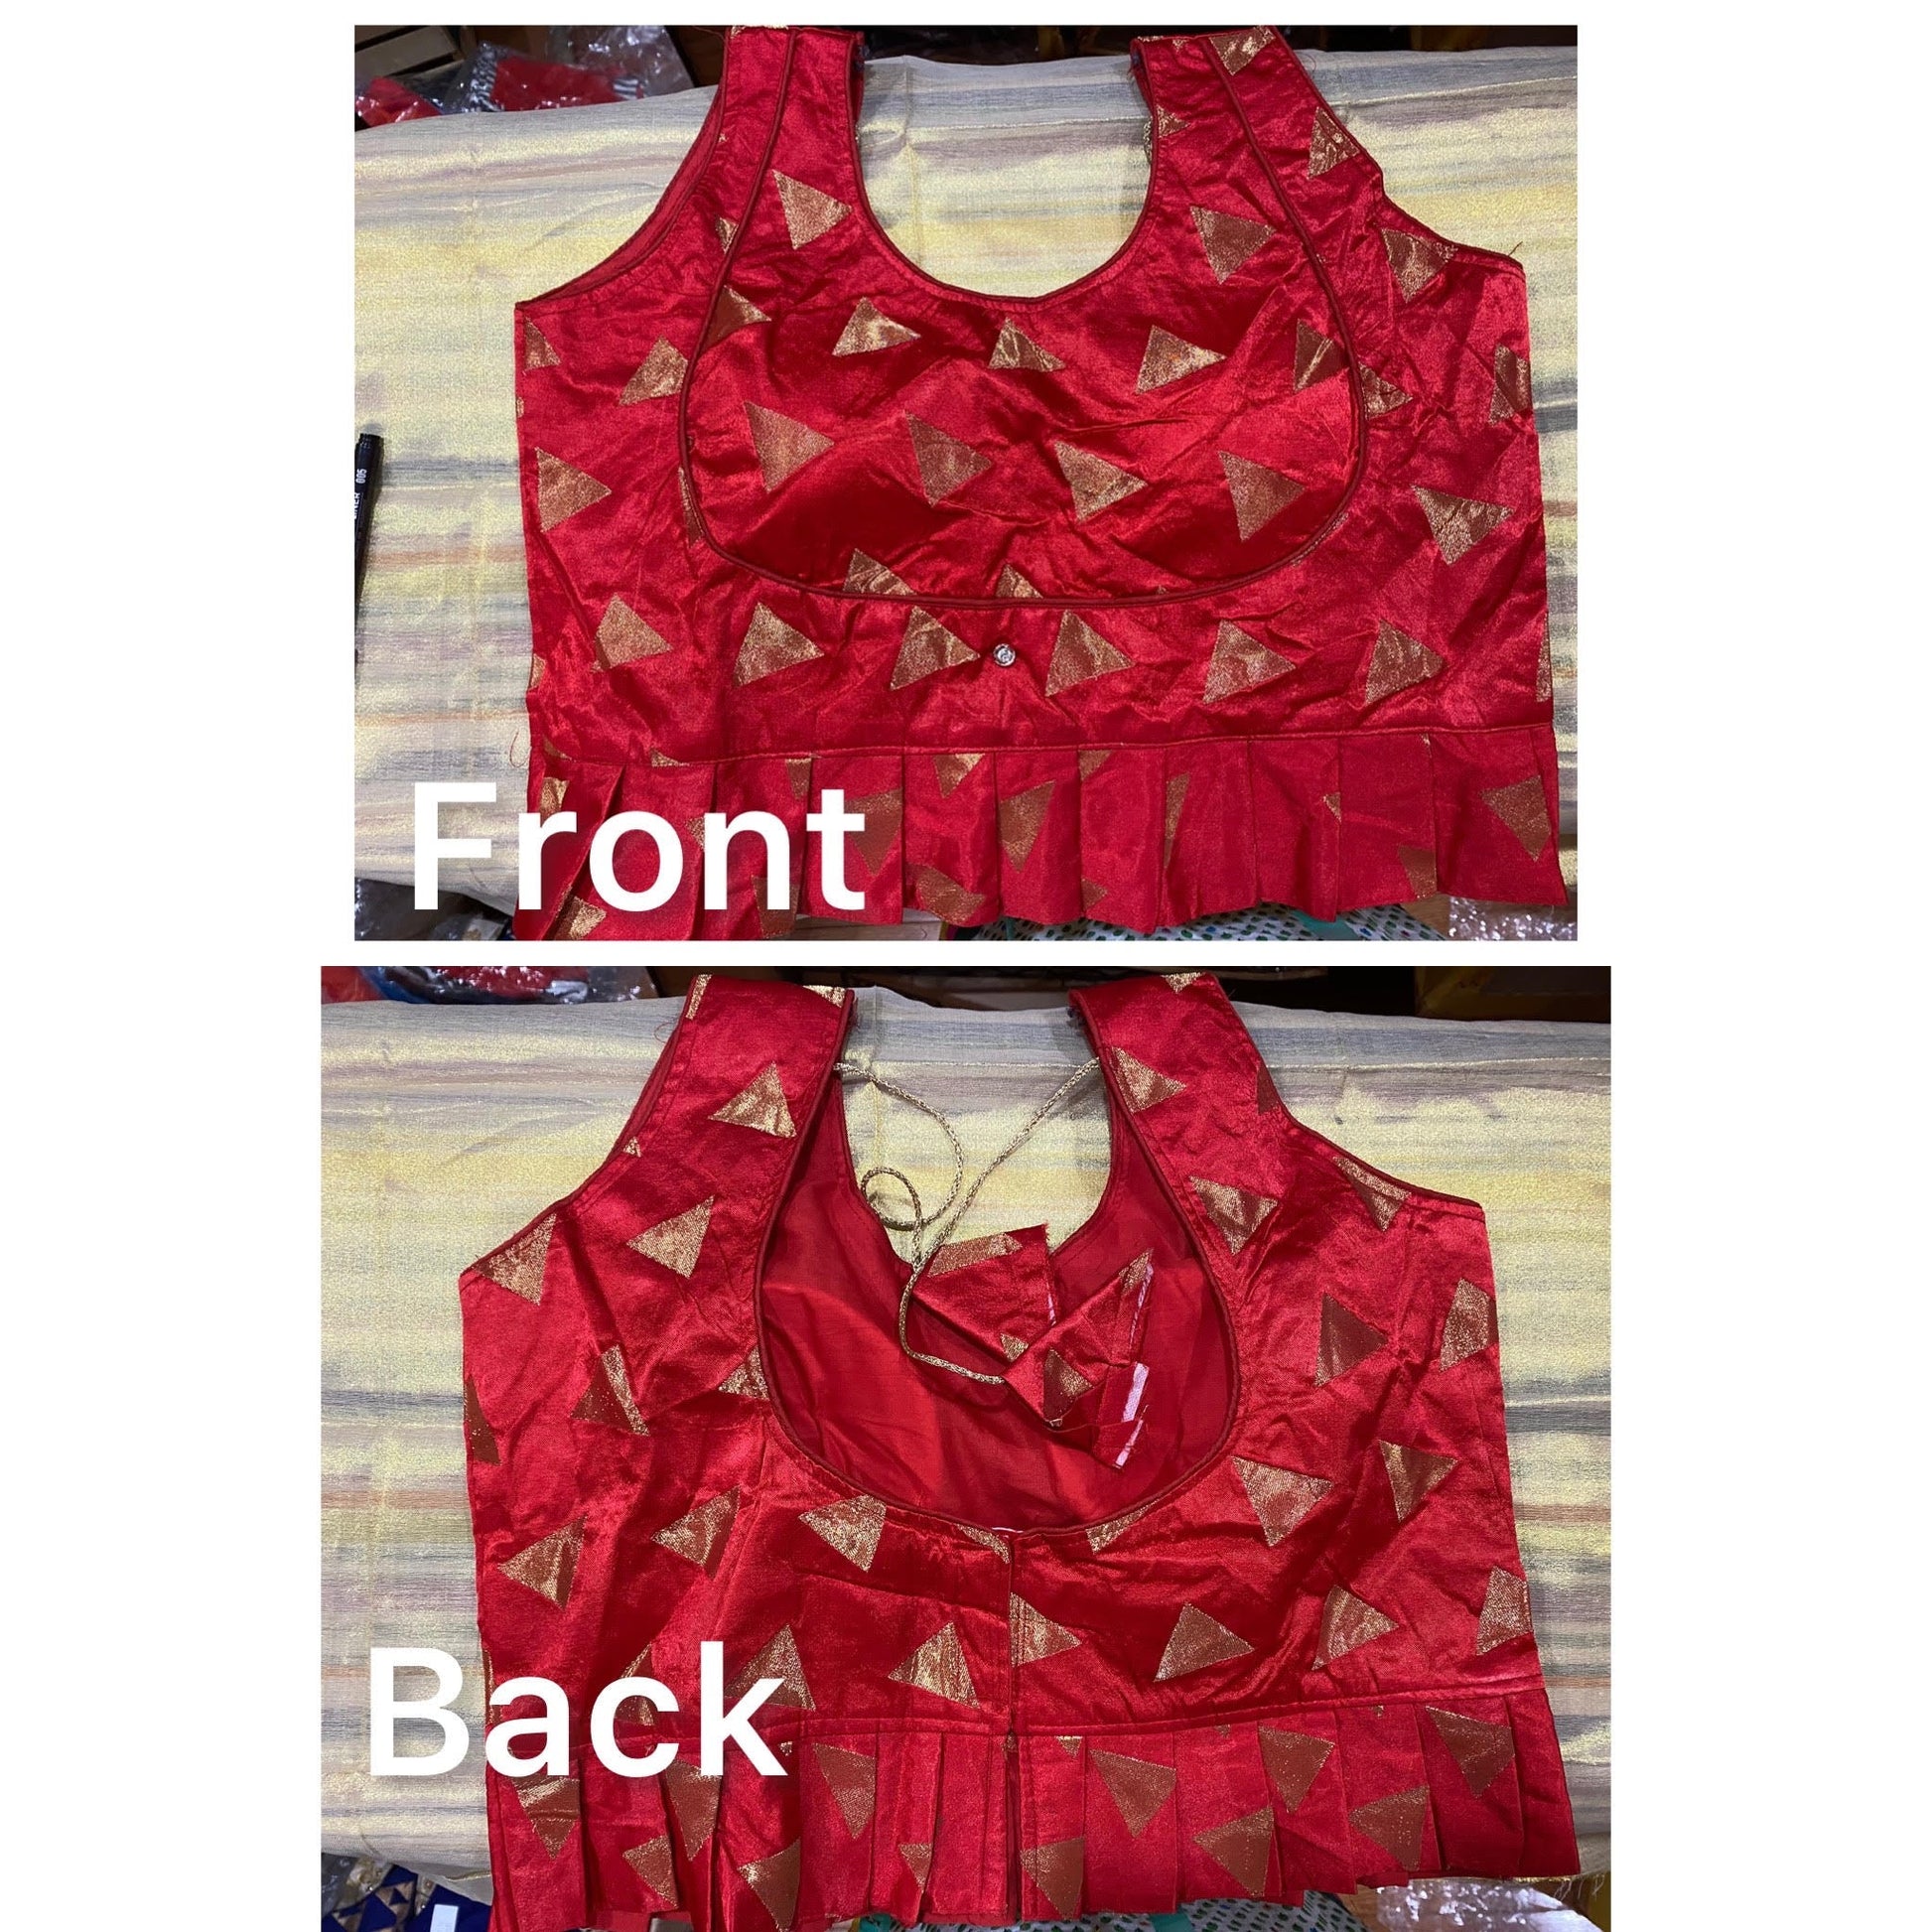 Tomato Red Blouse with Geometric patterns @ DressingStylesCA.com